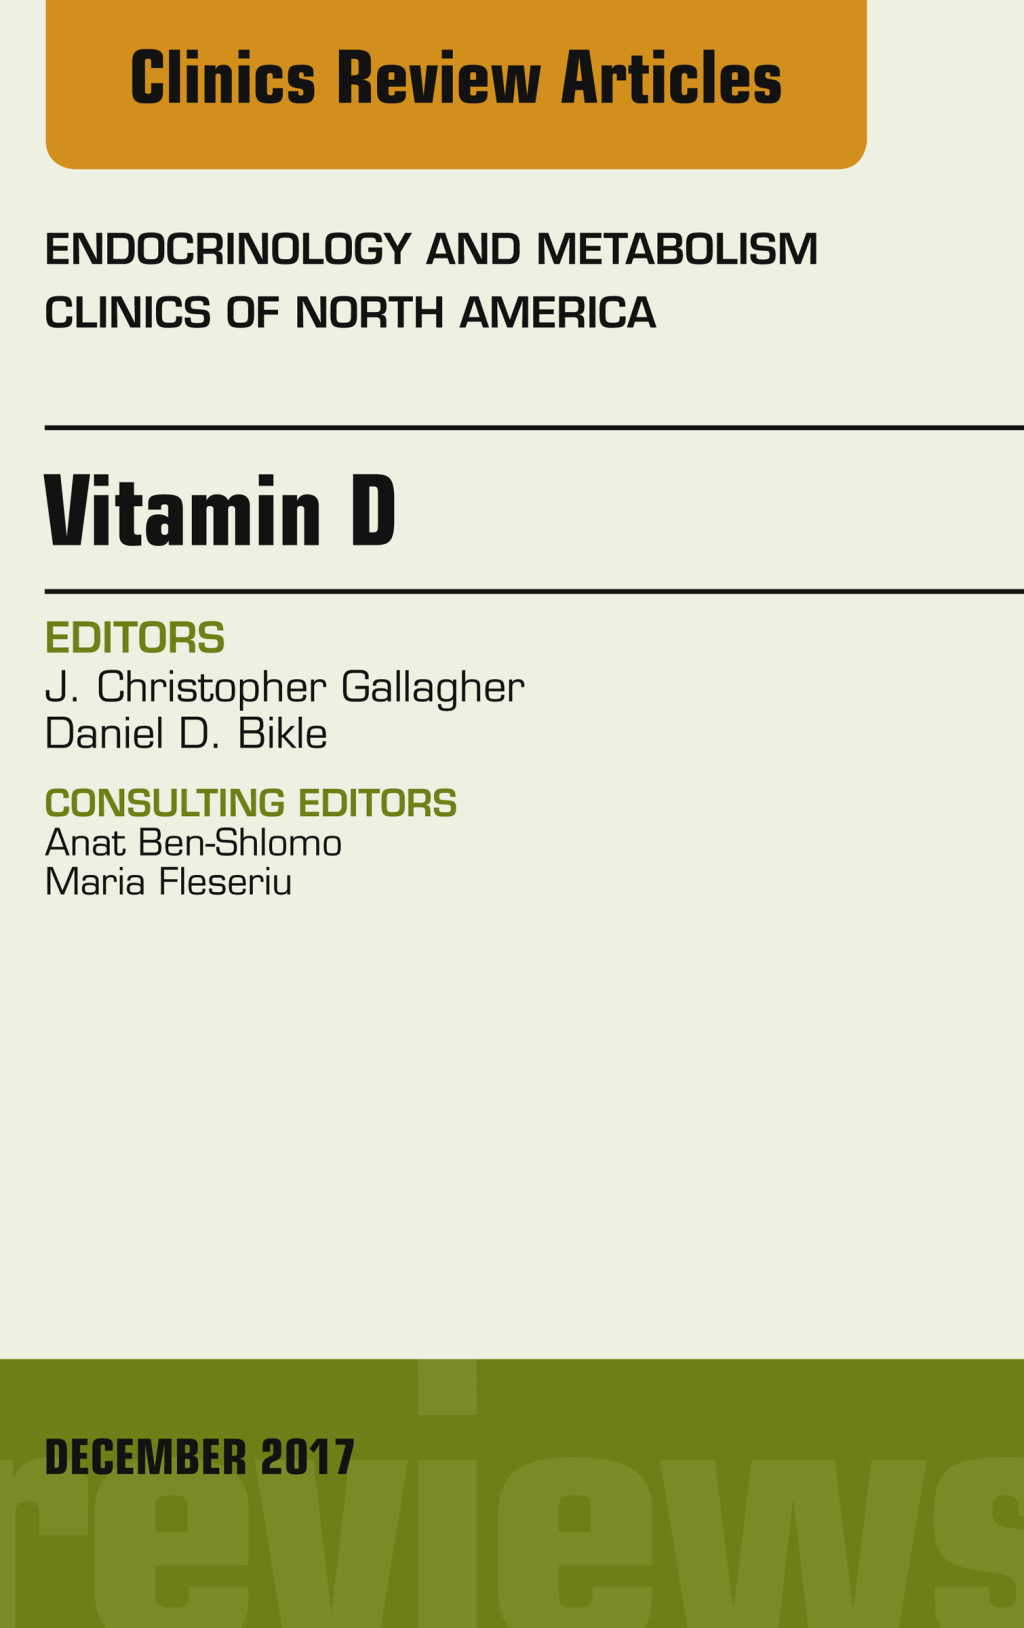 Vitamin D  An Issue of Endocrinology and Metabolism Clinics of North America (eBook) - J. Chris Gallagher; Daniel Bikle,